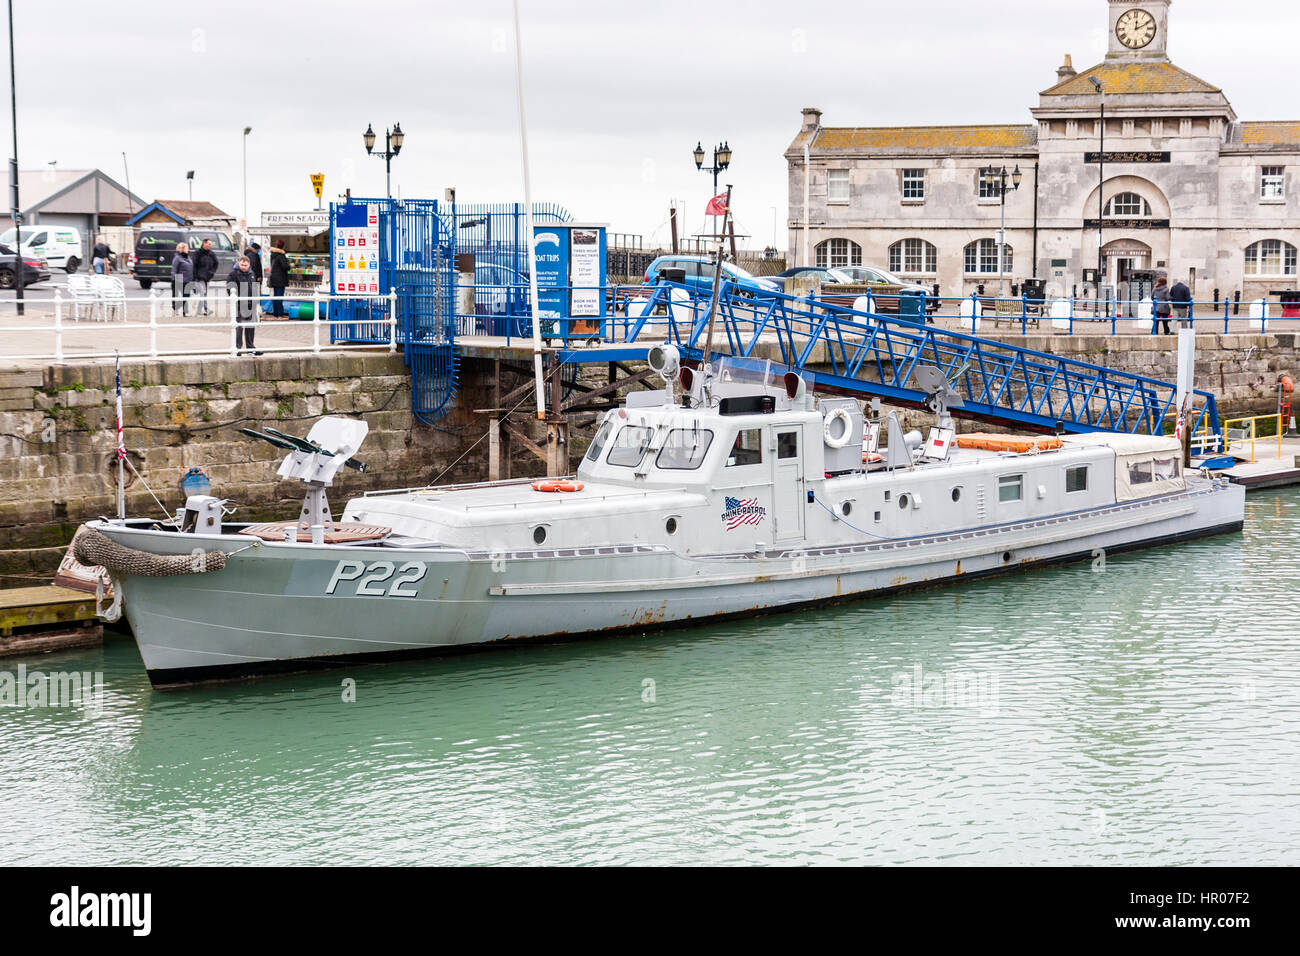 Restored P22, type 21 US naval Rhine River gunboat from the 1950s moored at Ramsgate harbour. Small launch with machine guns. Stock Photo